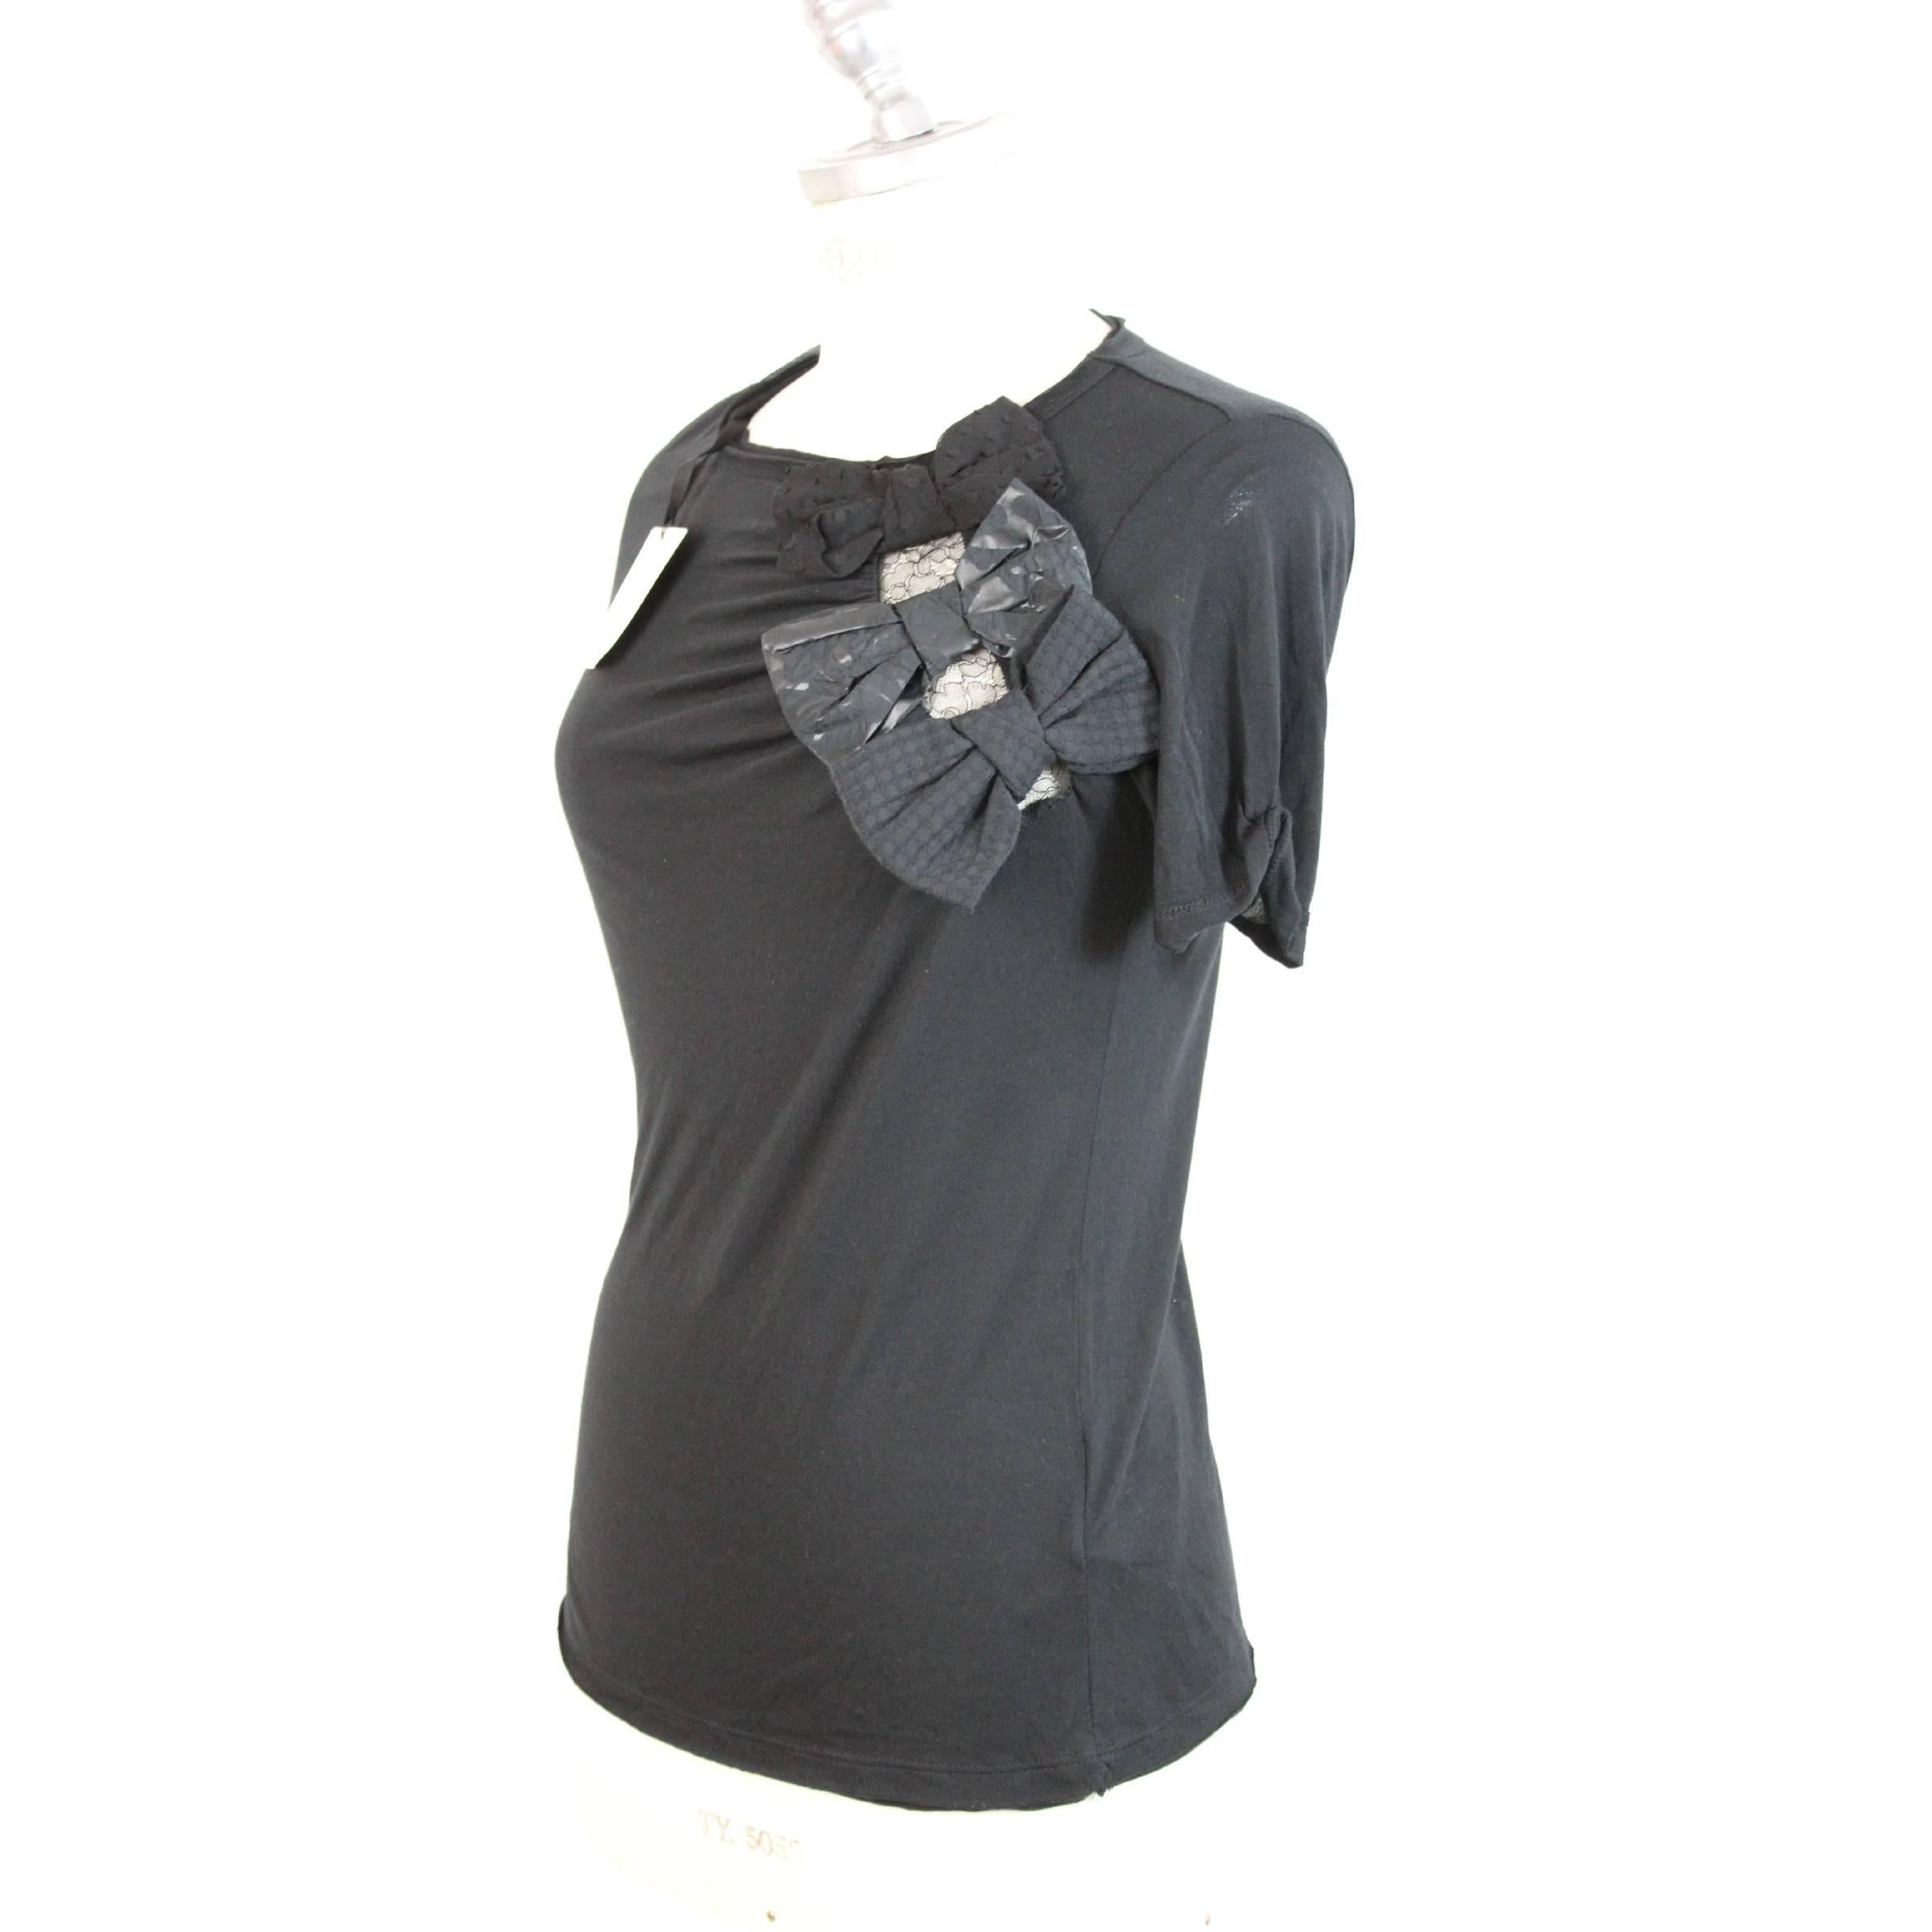 Valentino Nightgown cotton crew neck. Black stretch model. There are snowflakes on the shoulder in silk, short sleeve. New with tag. Made in Italy. 

Size 40 En 8 Uk 6 Us

Shoulder: 38 cm
Lenght: 59 cm
Bust/chest: 40 cm
Sleeve: 15 cm

Composition: